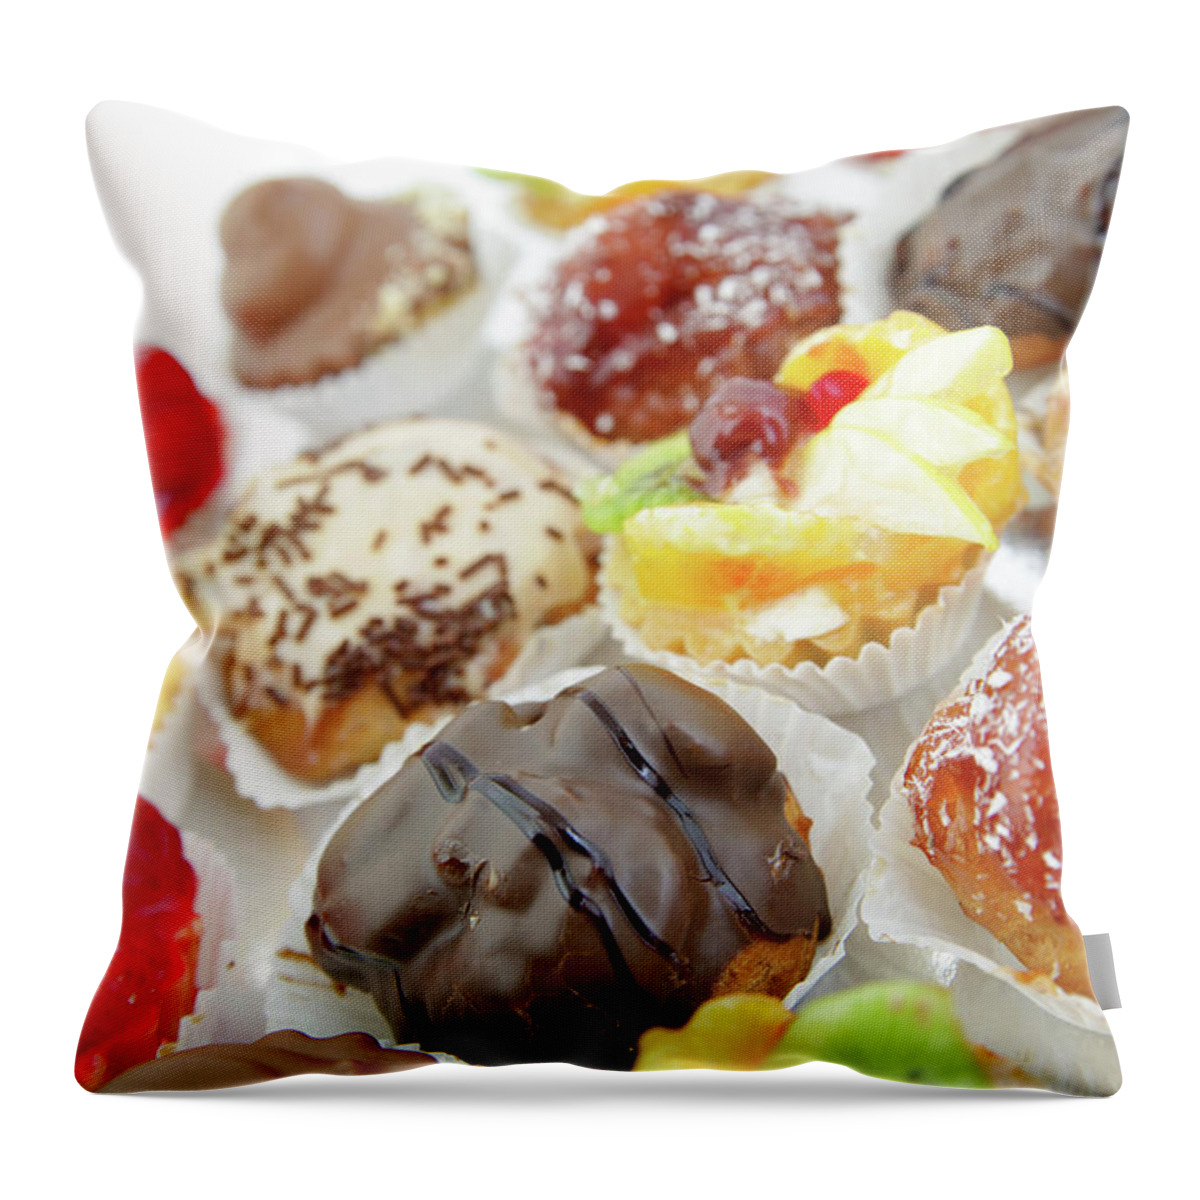 Small cakes with with different stuffing Throw Pillow by Michael